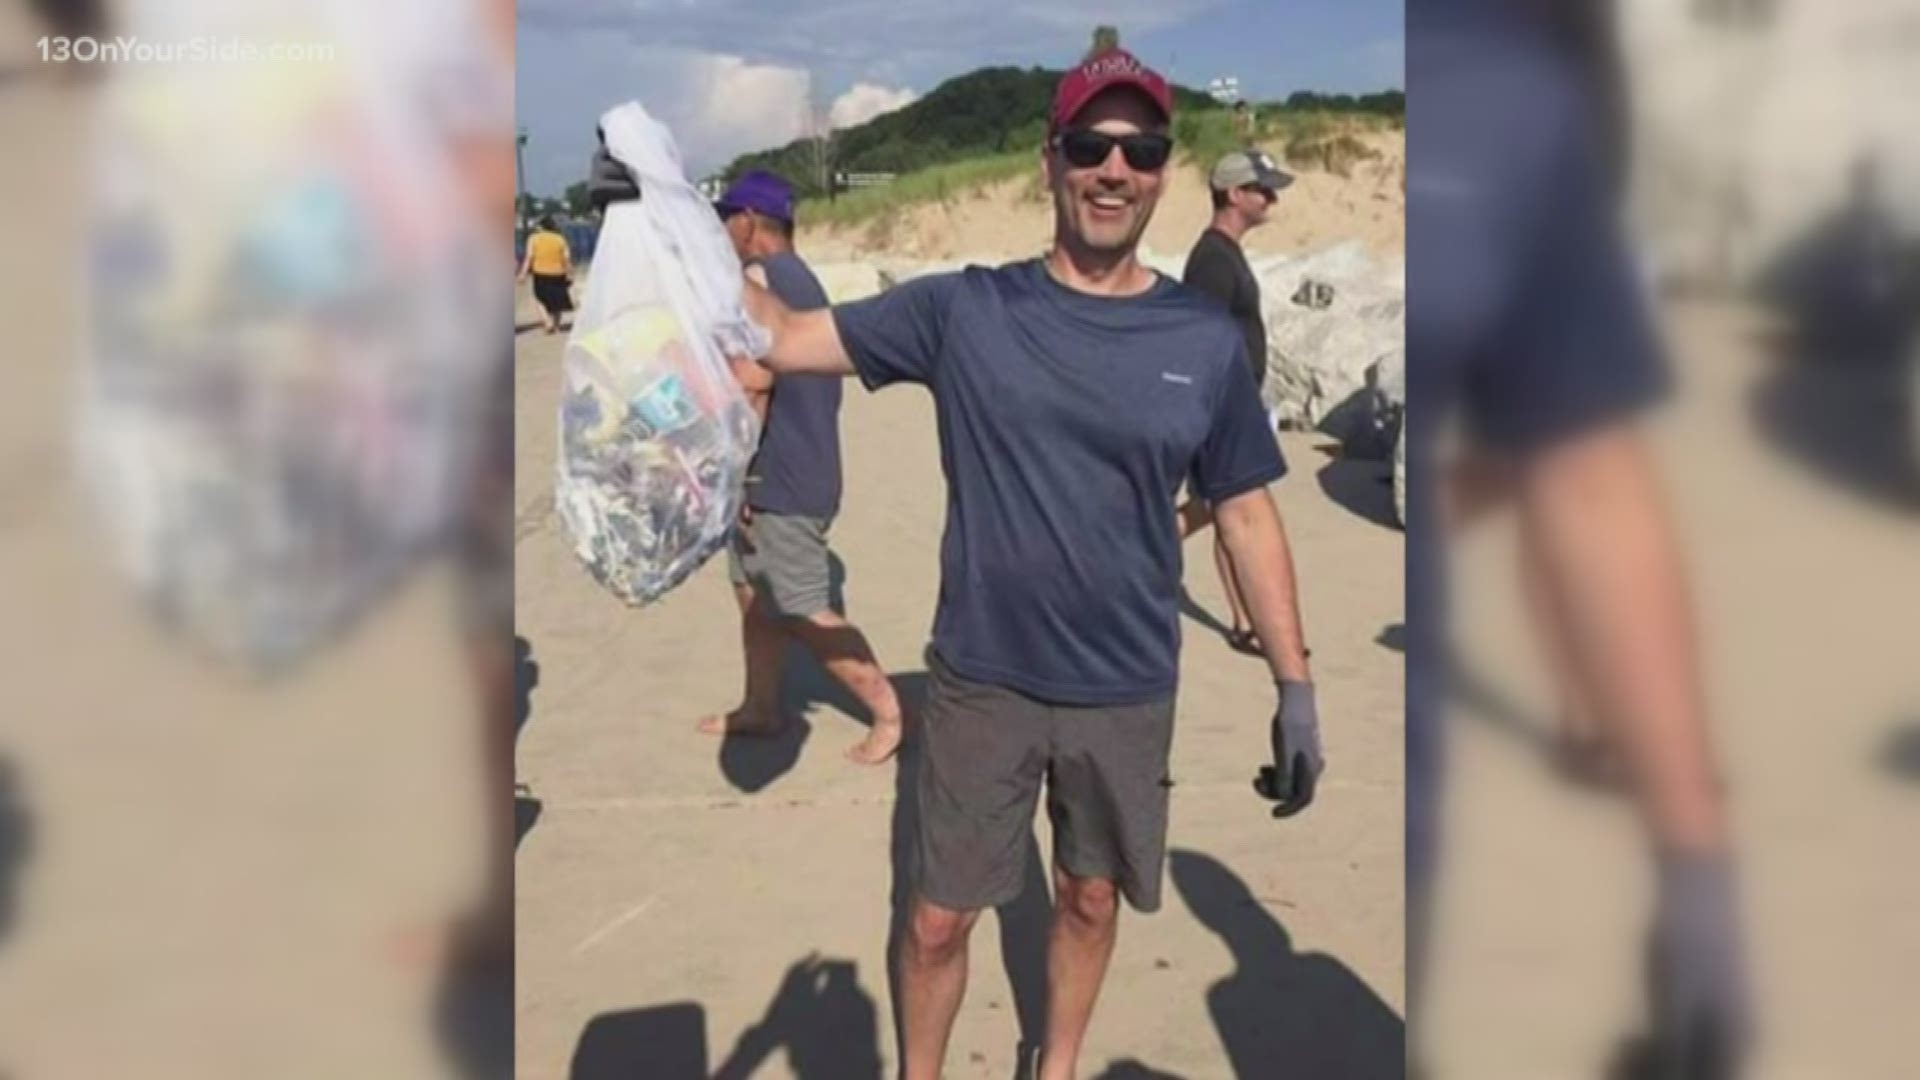 Ian Overway organized a volunteer clean up at Grand Haven State Park earlier this month.